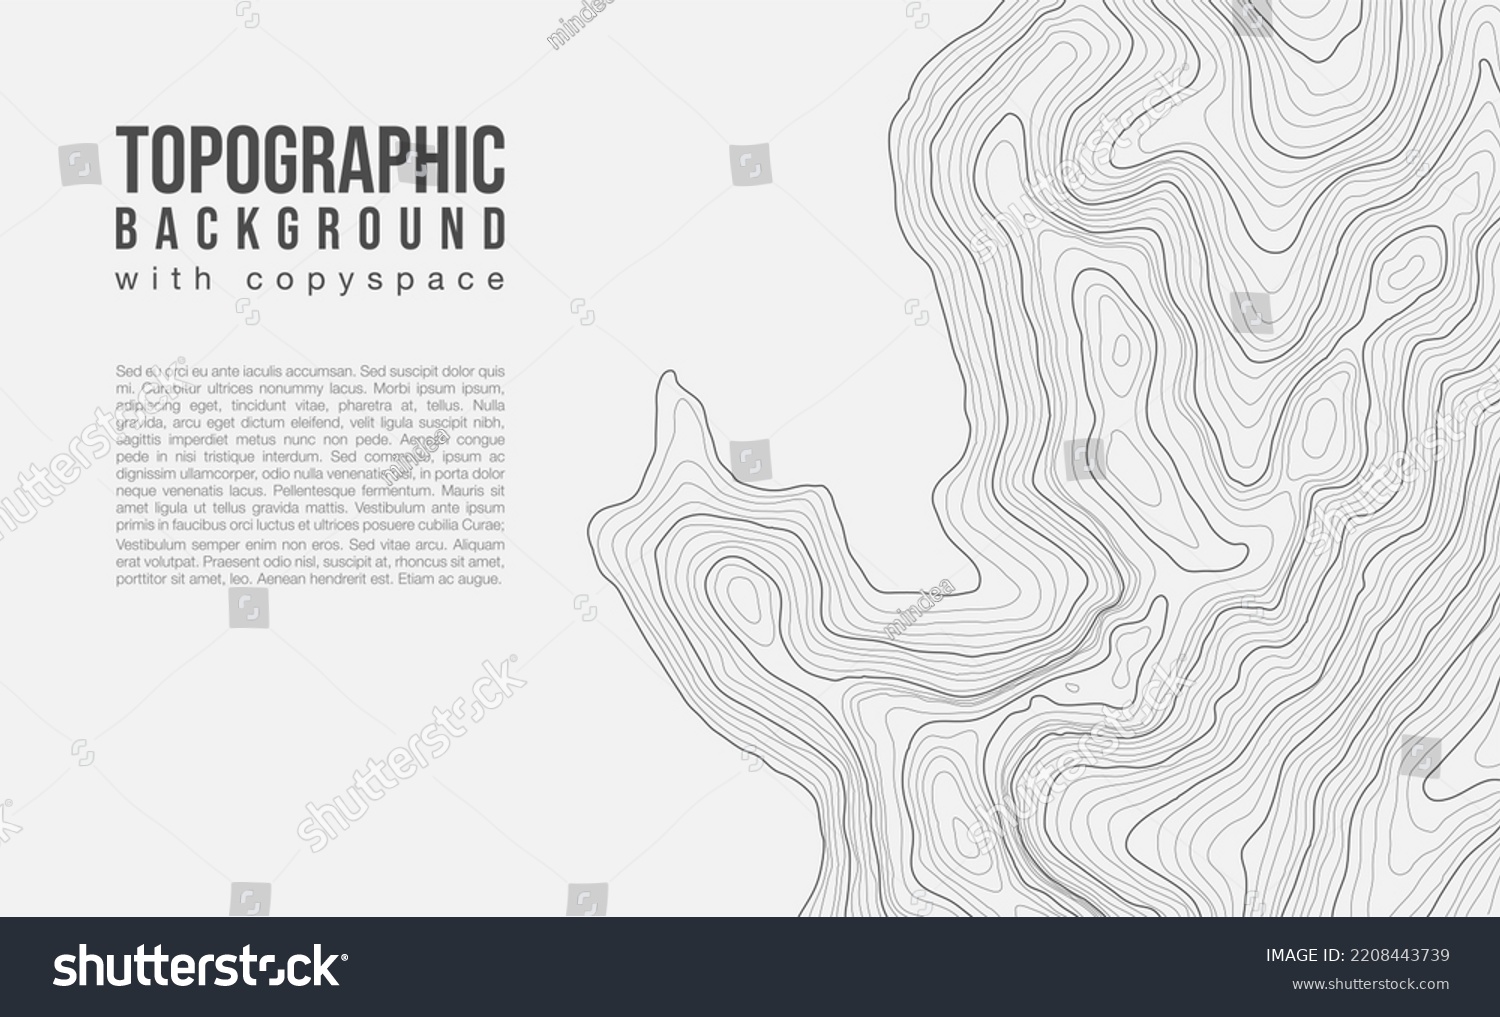 Fully editable and scalable vector illustration of topographic map with a copy space on a light background. Great as an abstract background. #2208443739